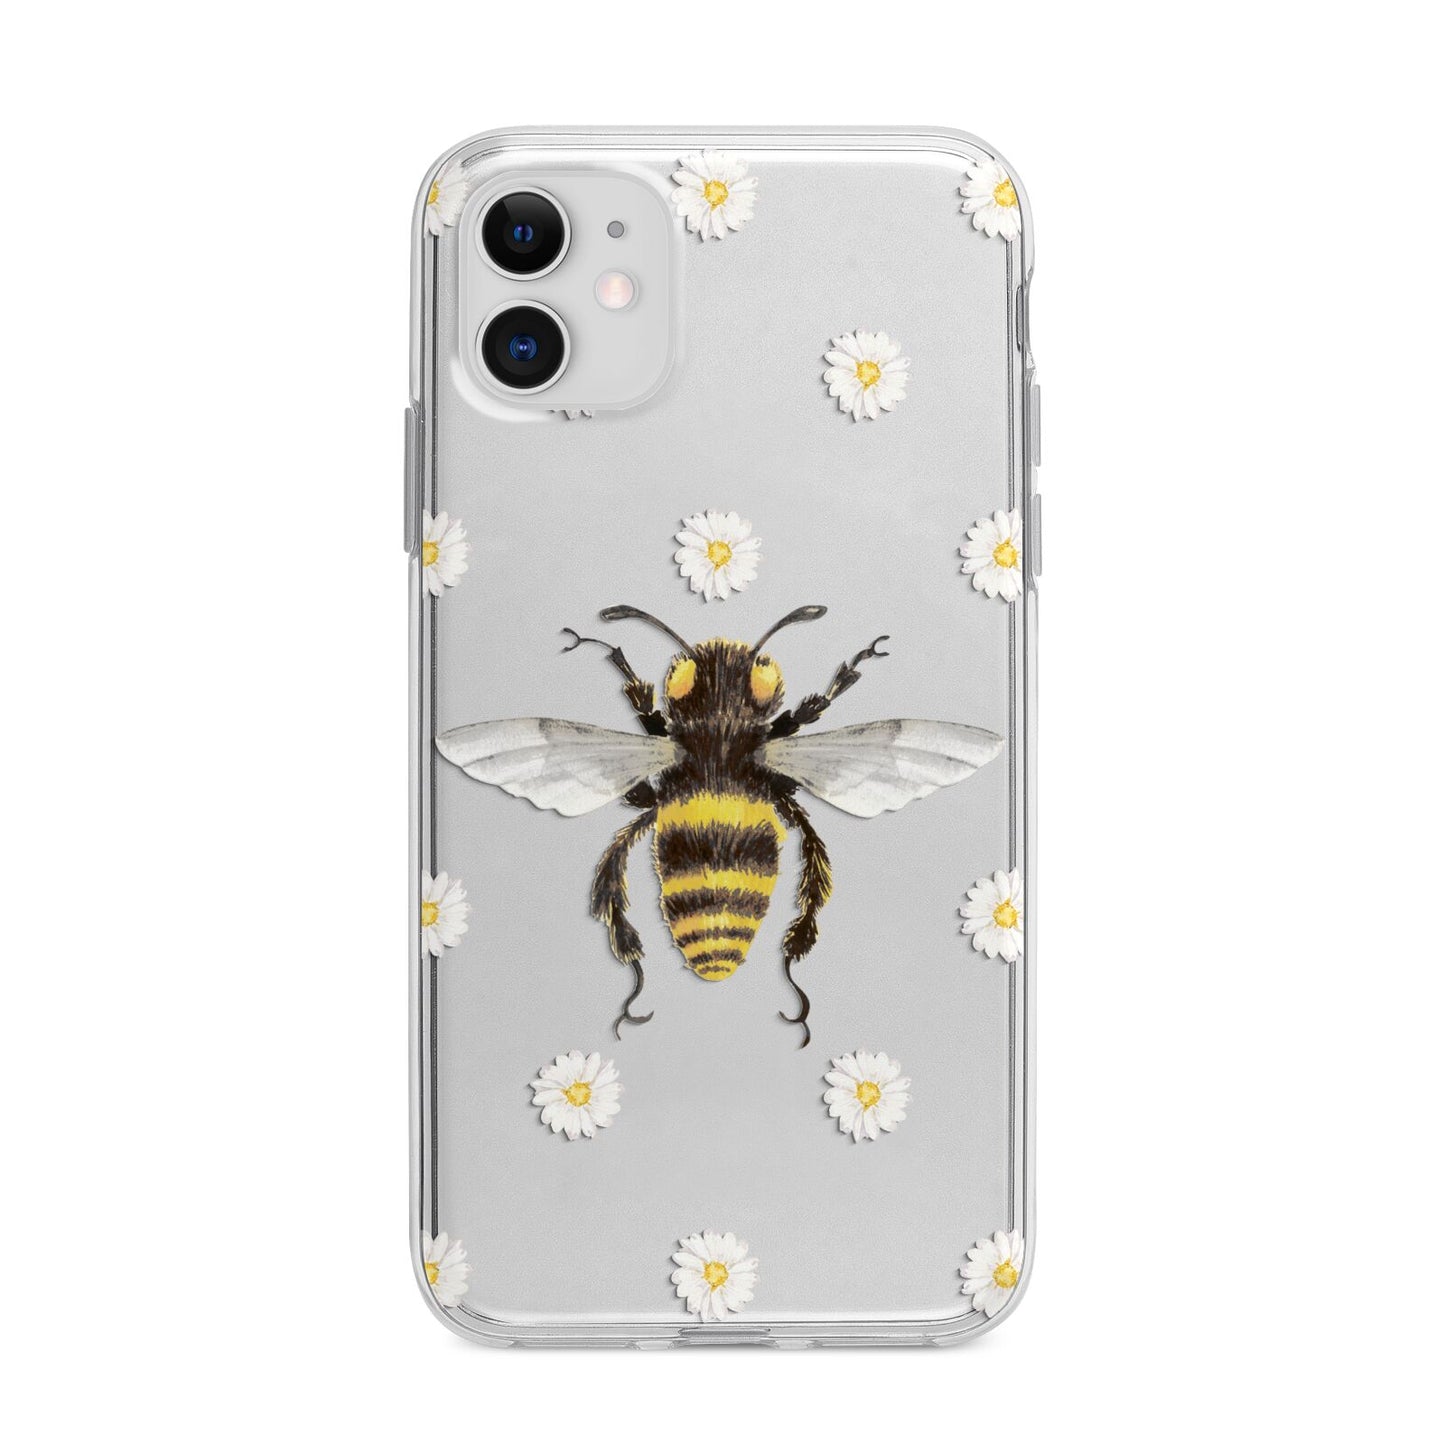 Bee Illustration with Daisies Apple iPhone 11 in White with Bumper Case